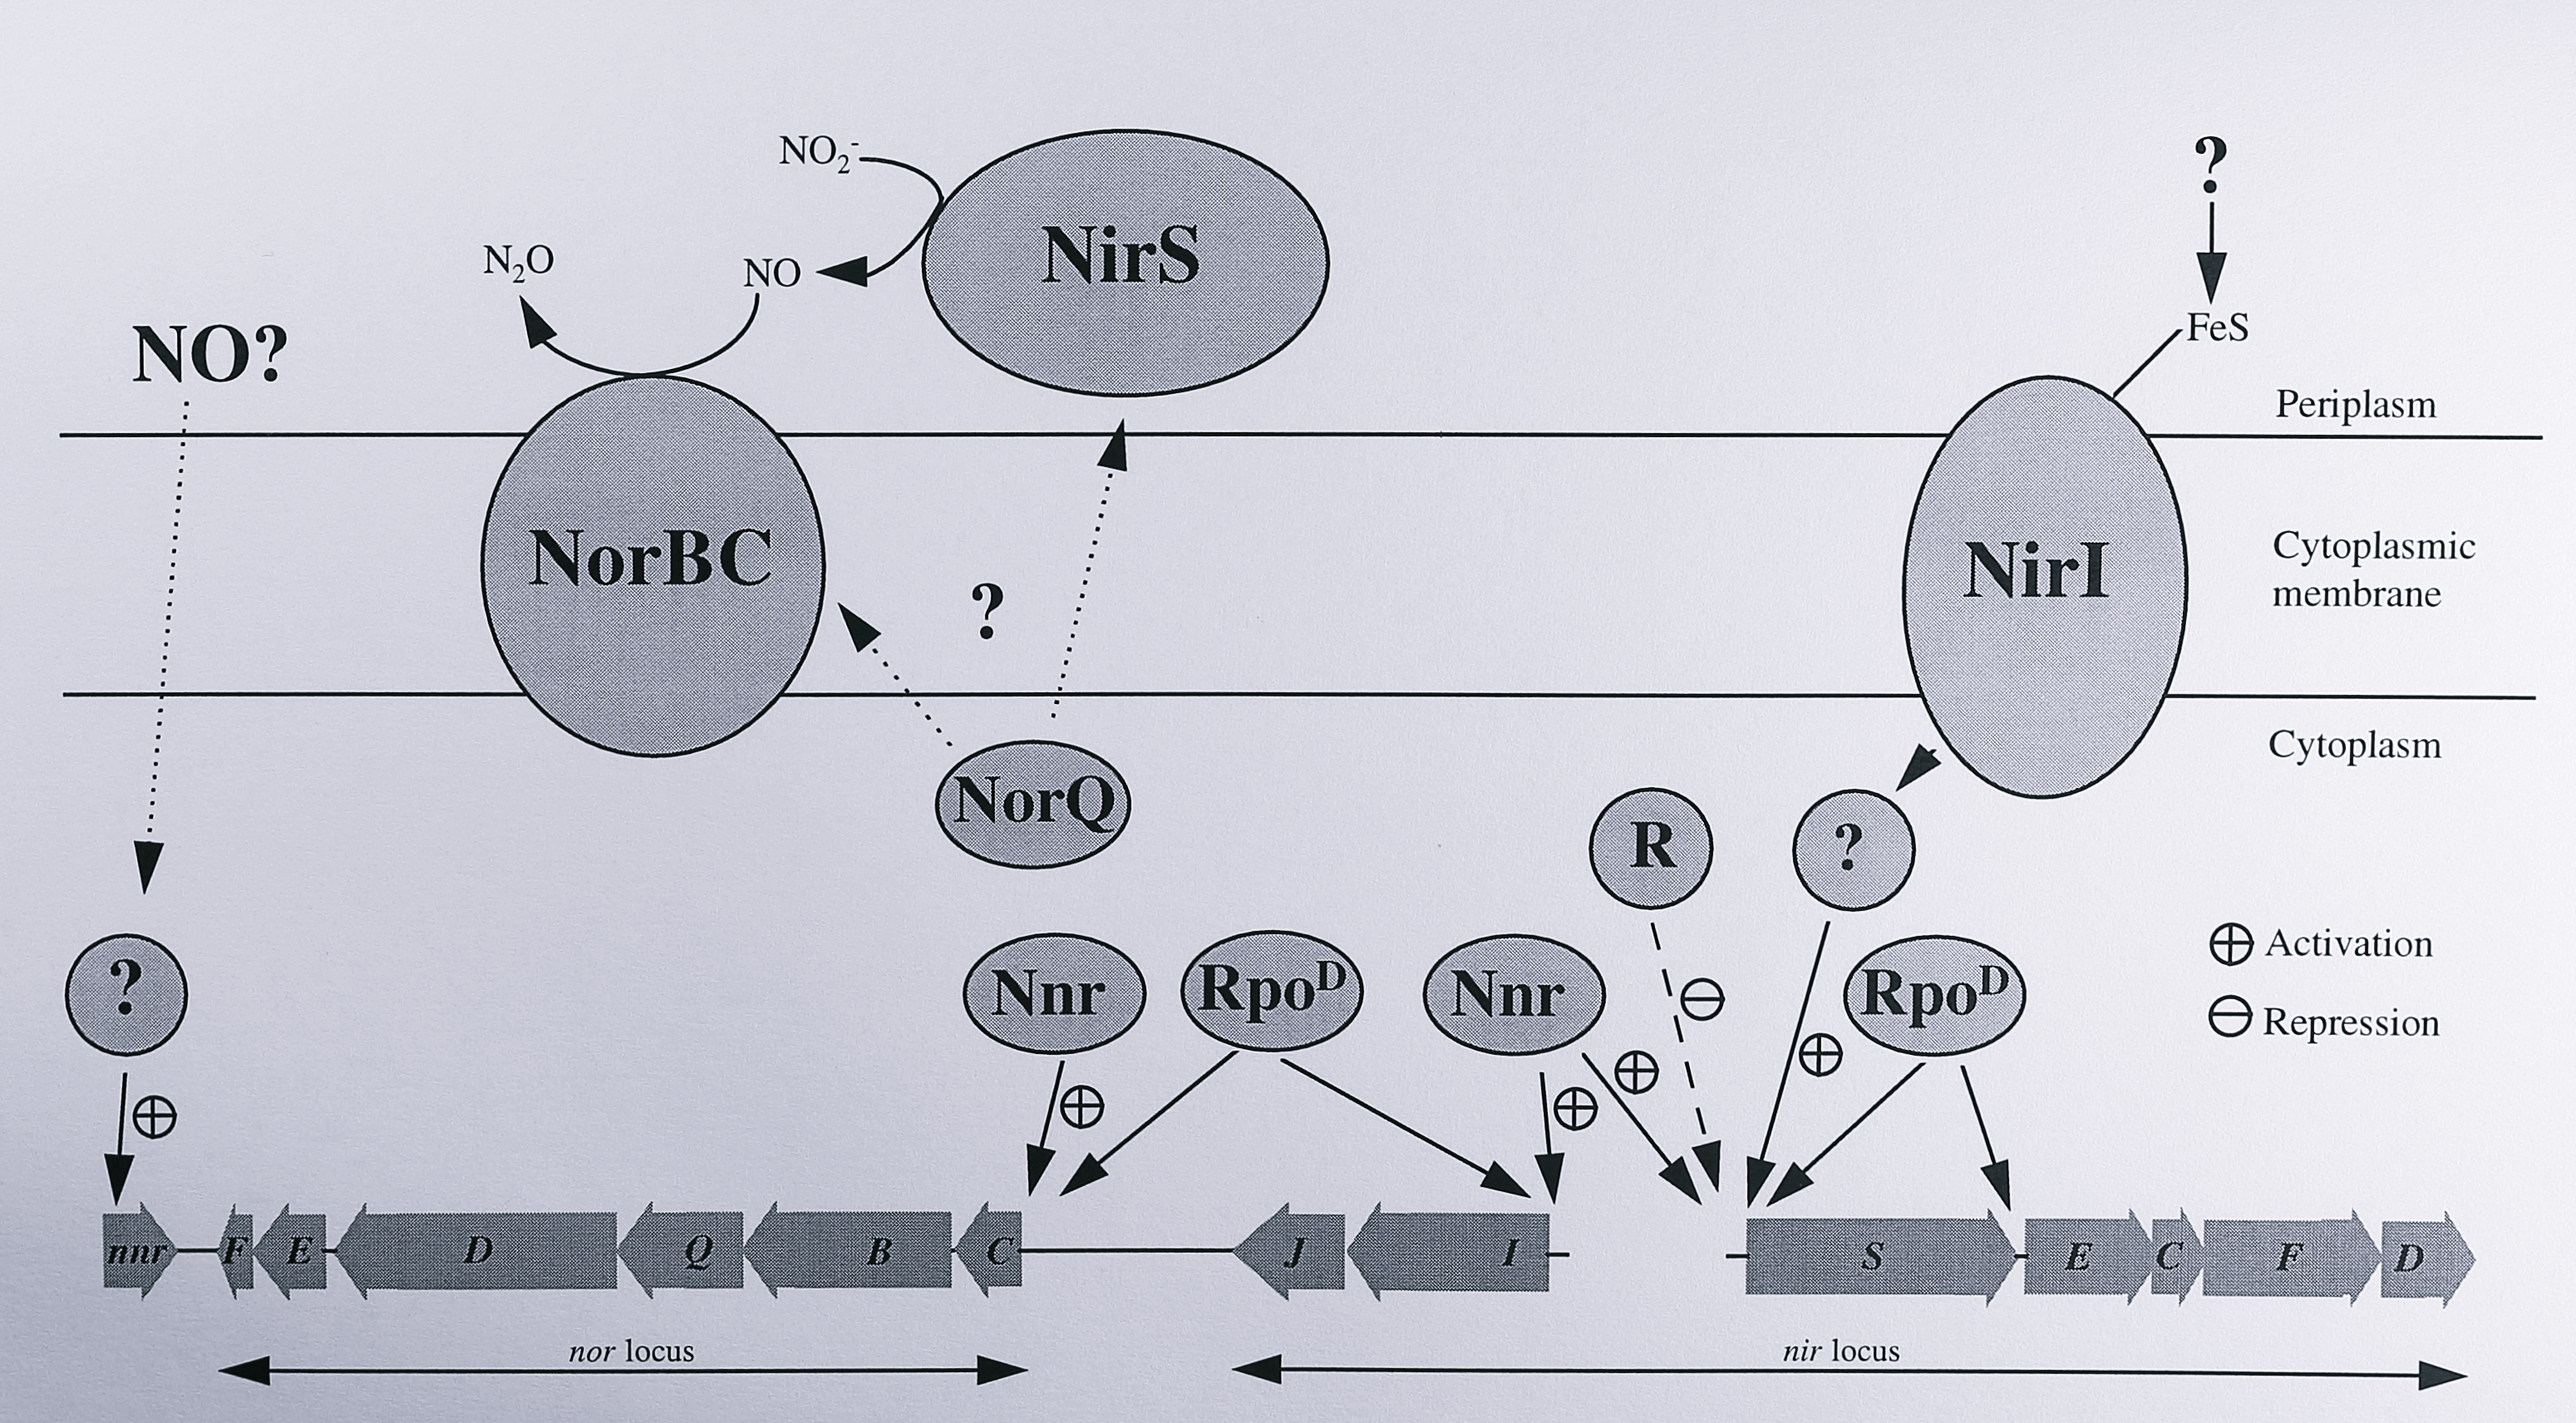 Putative factors influencing the transcription of nitrite and nitric oxide reductases in _T. pantotropha_. In this diagram the Nnr protein is assumed to be a transcriptional activator for the _nirS_, _nirI_ and _norCB_ genes. The factor(s) that activate transcription of the _nnr_ gene are unknown. NirI also activates transcription of the _nirS_ gene, possibly through an as-yet unidentified cytoplasmic protein. RpoD represents an alternative sigma factor involved in transcription of the denitrification genes; it may not be the same protein in all cases. The circle labelled 'R' indicates an as-yet unidentified repressor protein that binds upstream of the _nirS_ gene. The NorQ protein is thought to modulate the activities of the nitrite and nitric oxide reductases; its mode of action is not known. More details are given in the text.